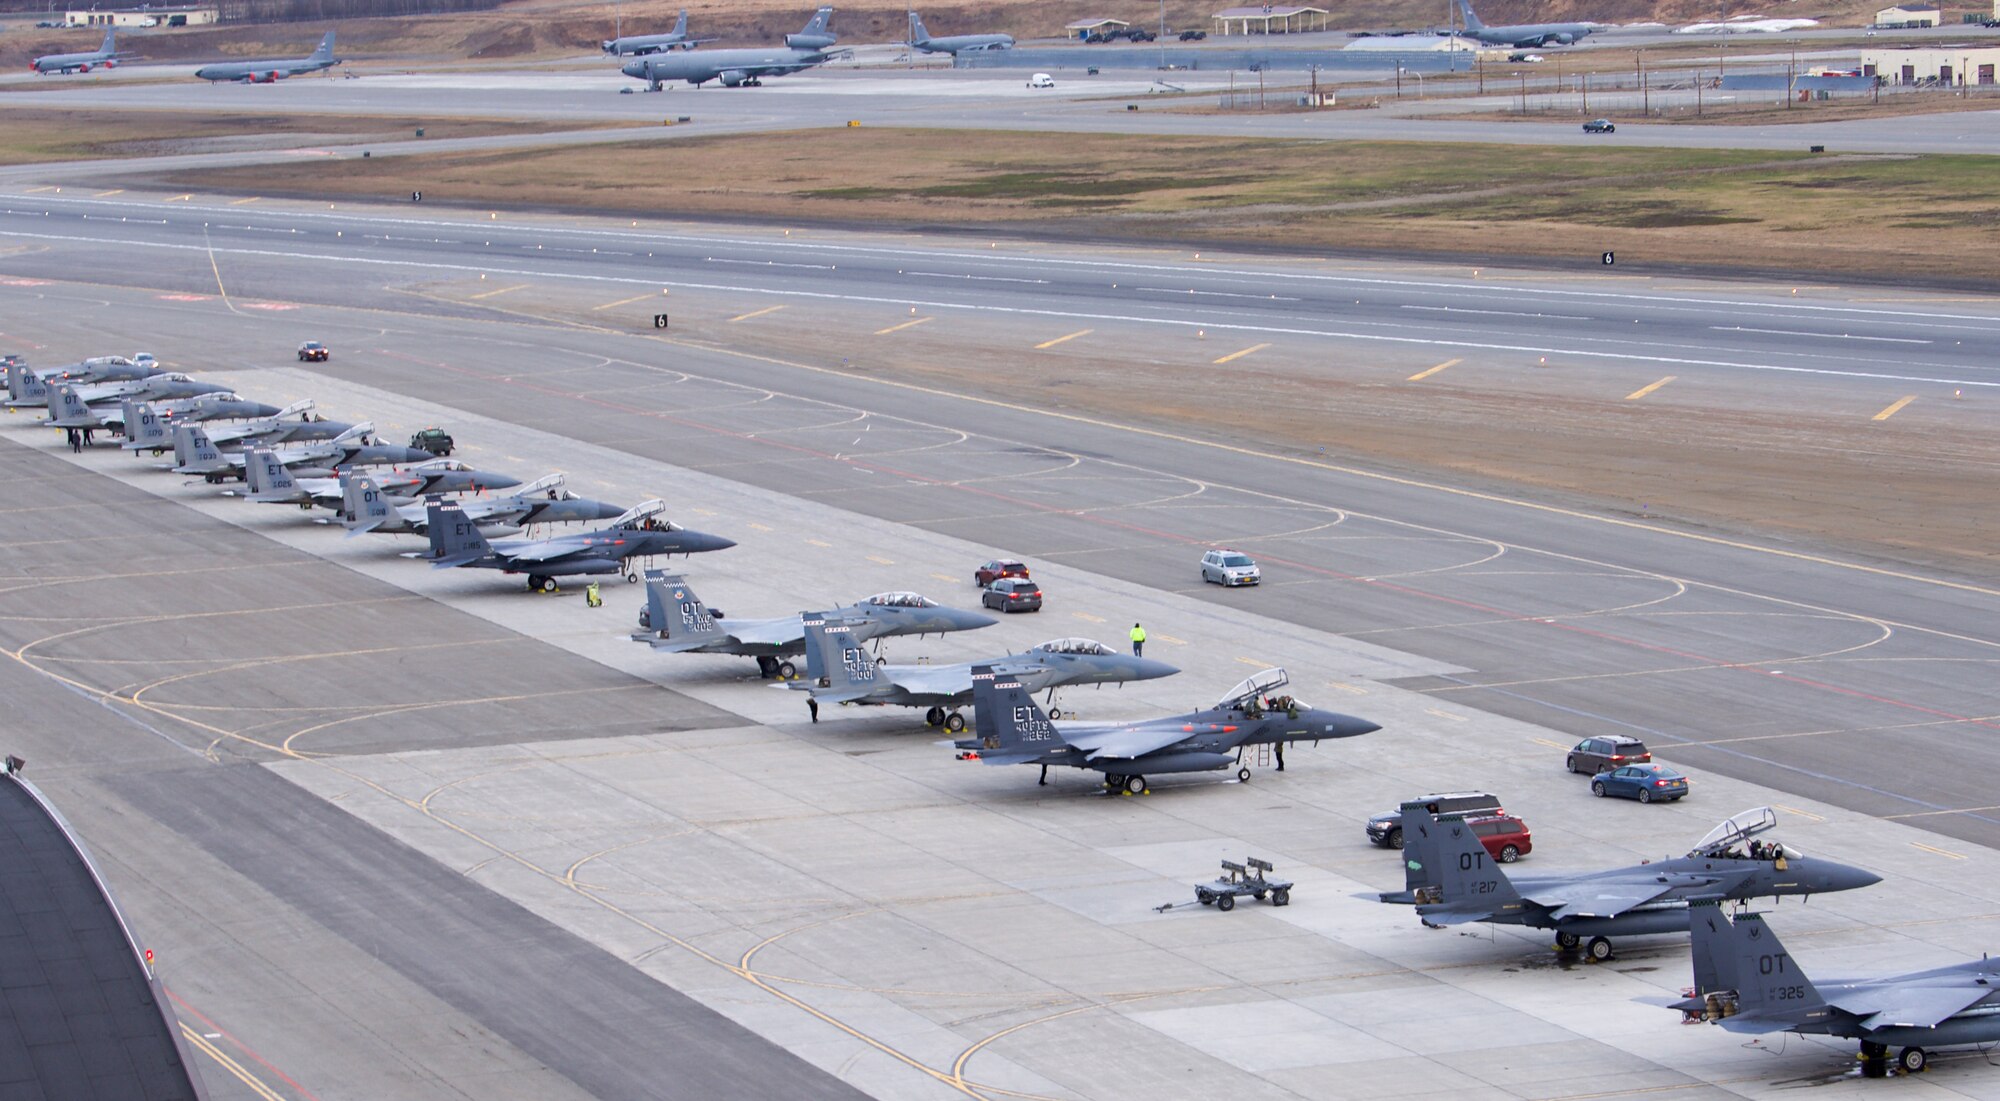 F-15s on the rams